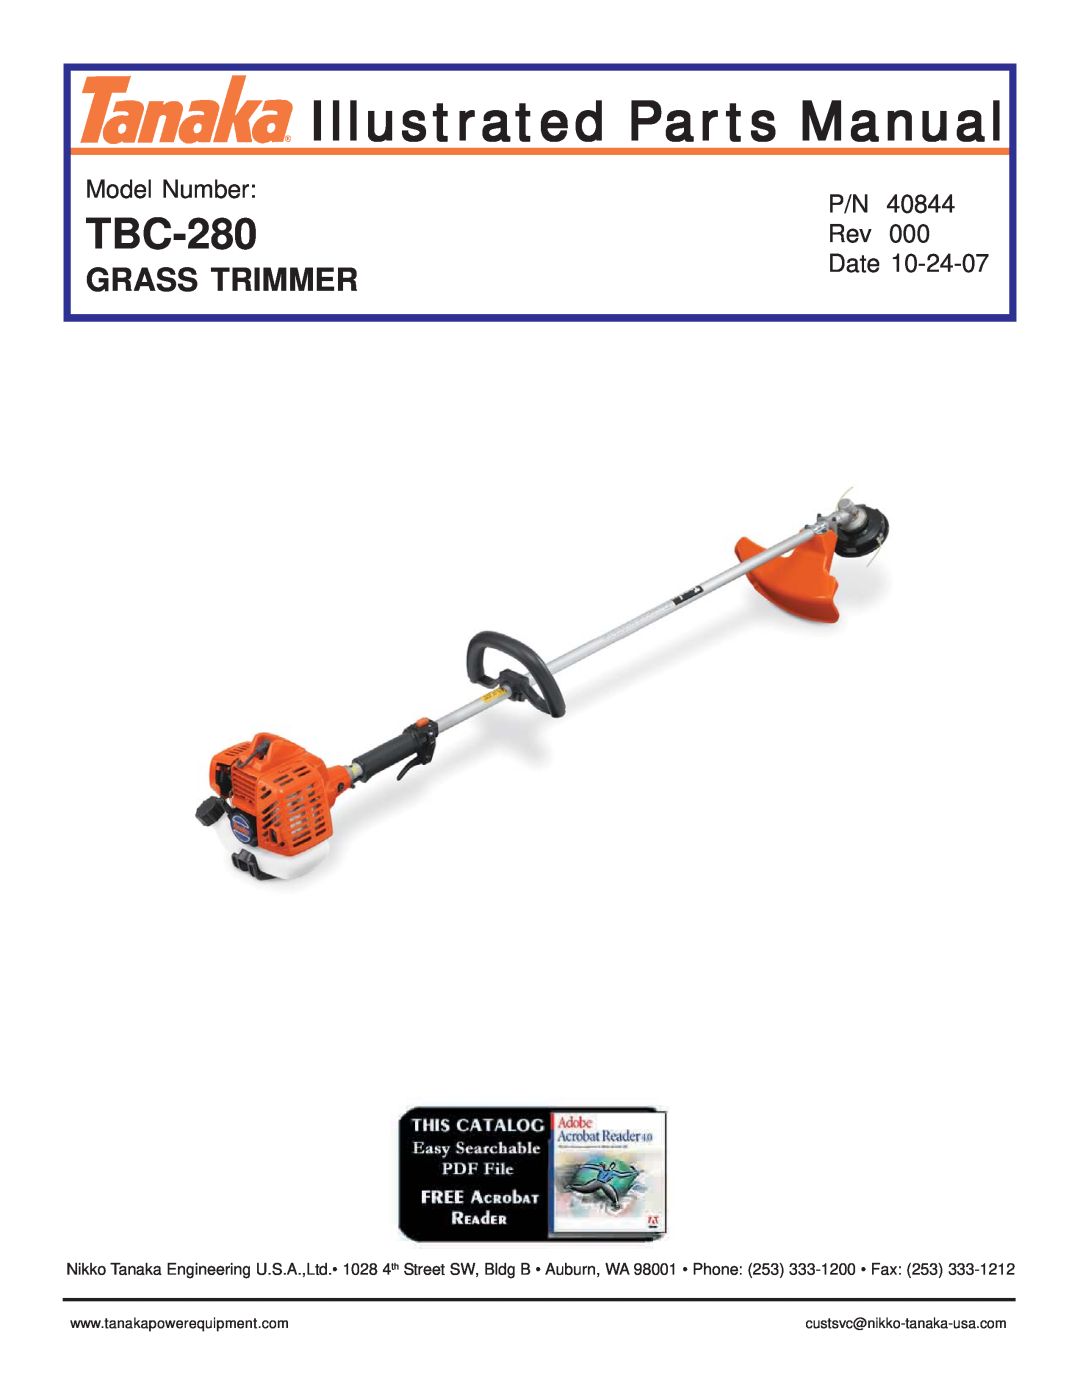 Tanaka TBC-280 manual Grass Trimmer, Model Number, Date, Illustrated Parts Manual 